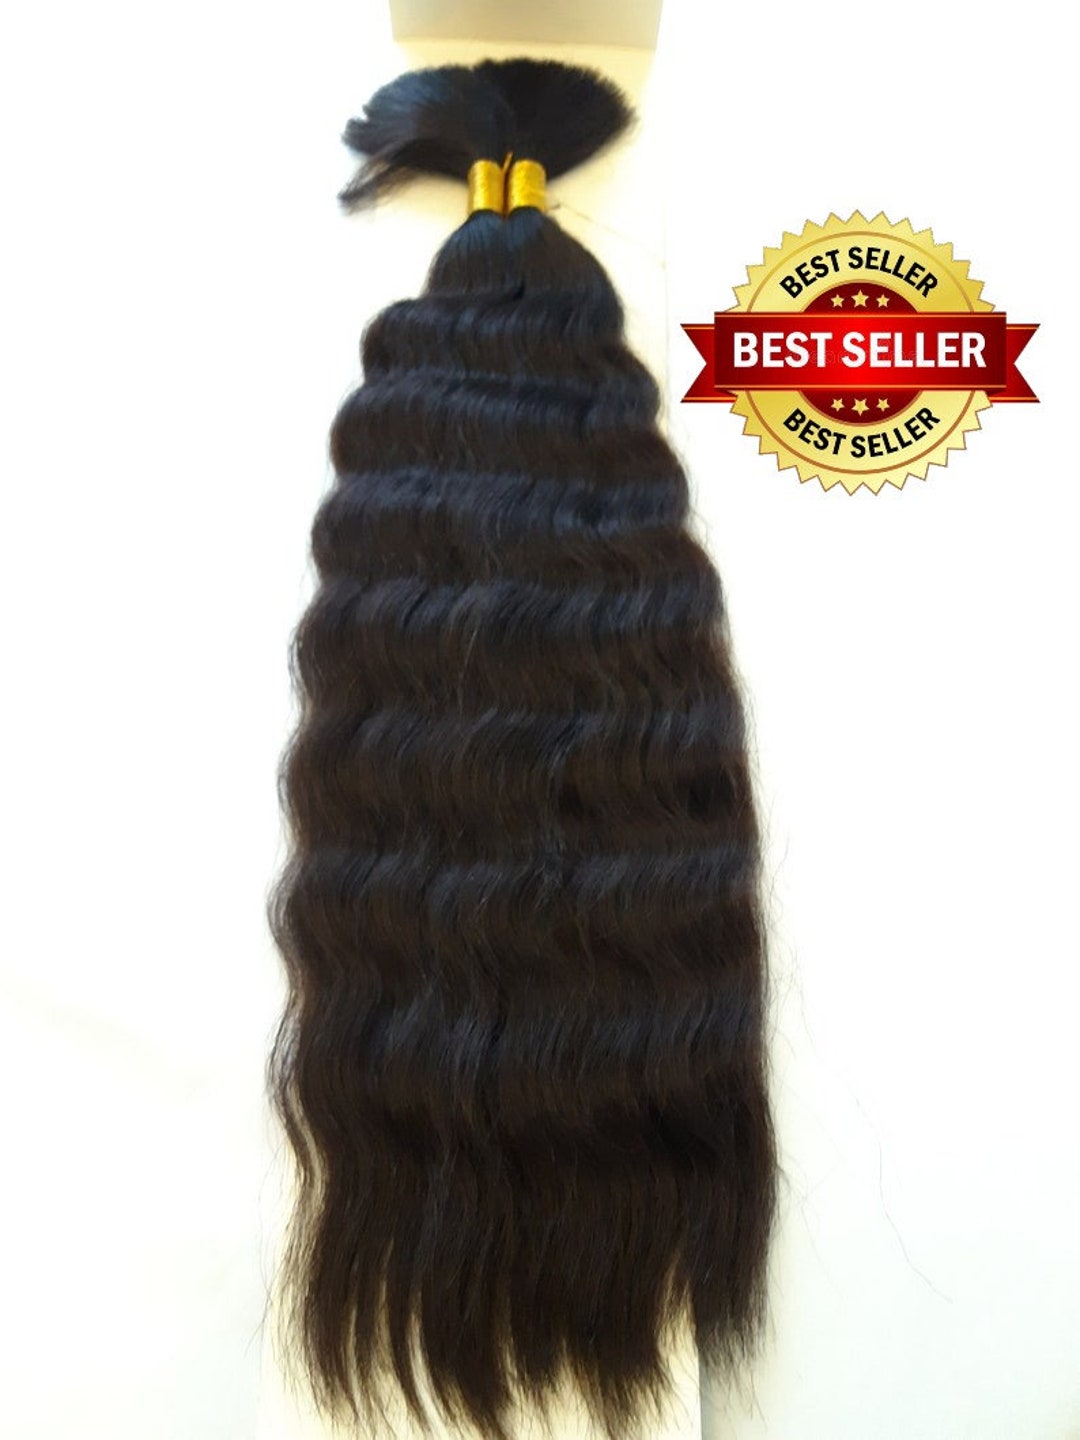 Ombre Hair Braiding Extensions - Q&A Remy vs. non-Remy hair and heat  resistance